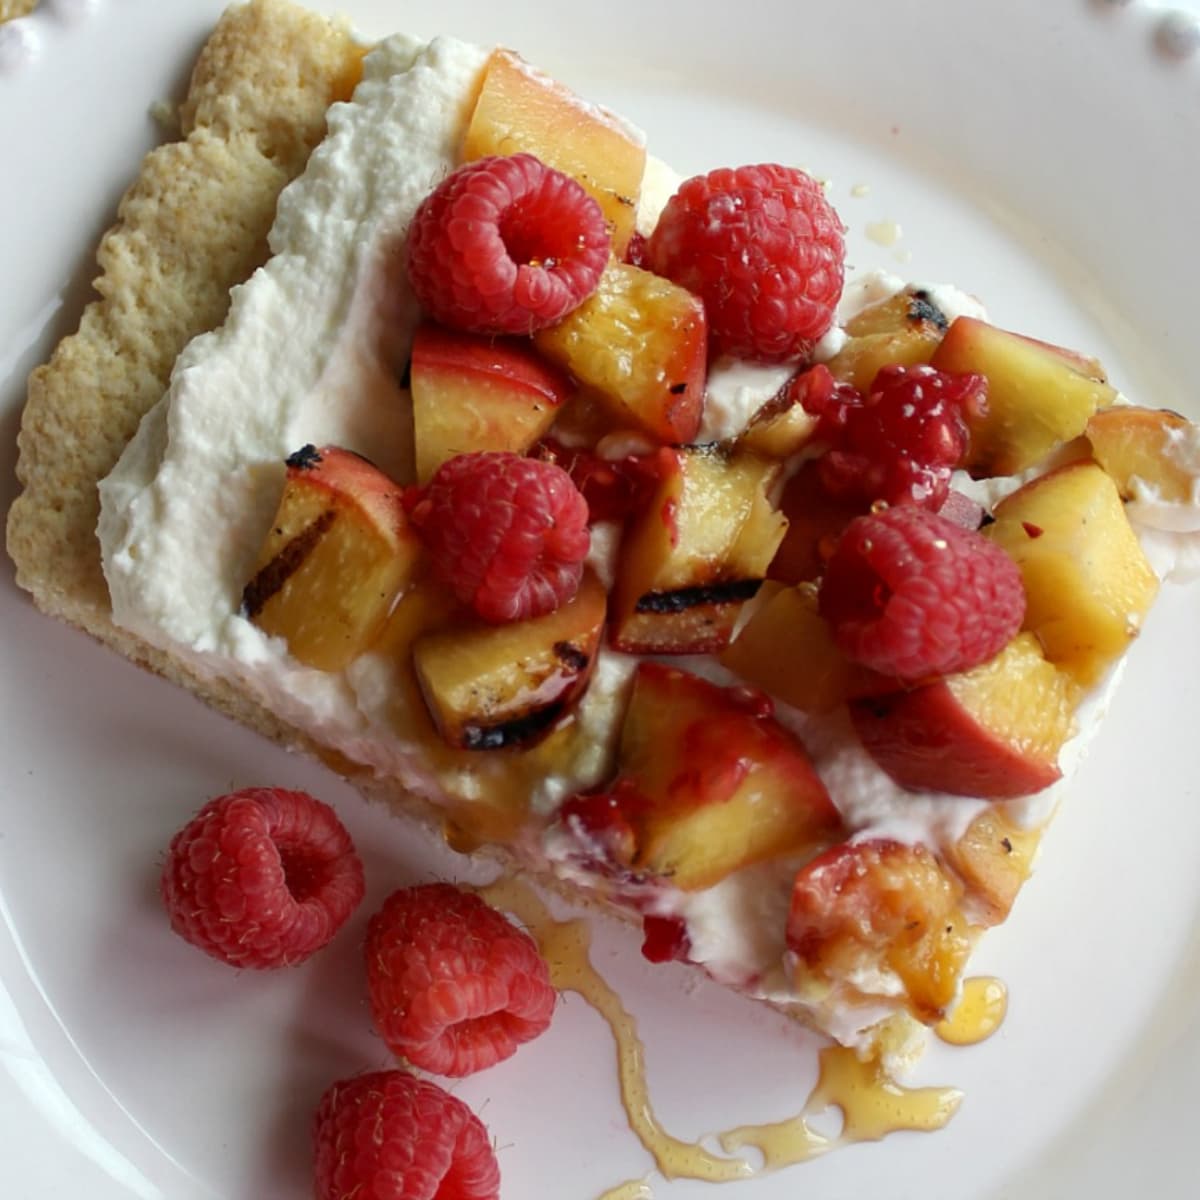 Peaches drizzled honey over cream and shortcake